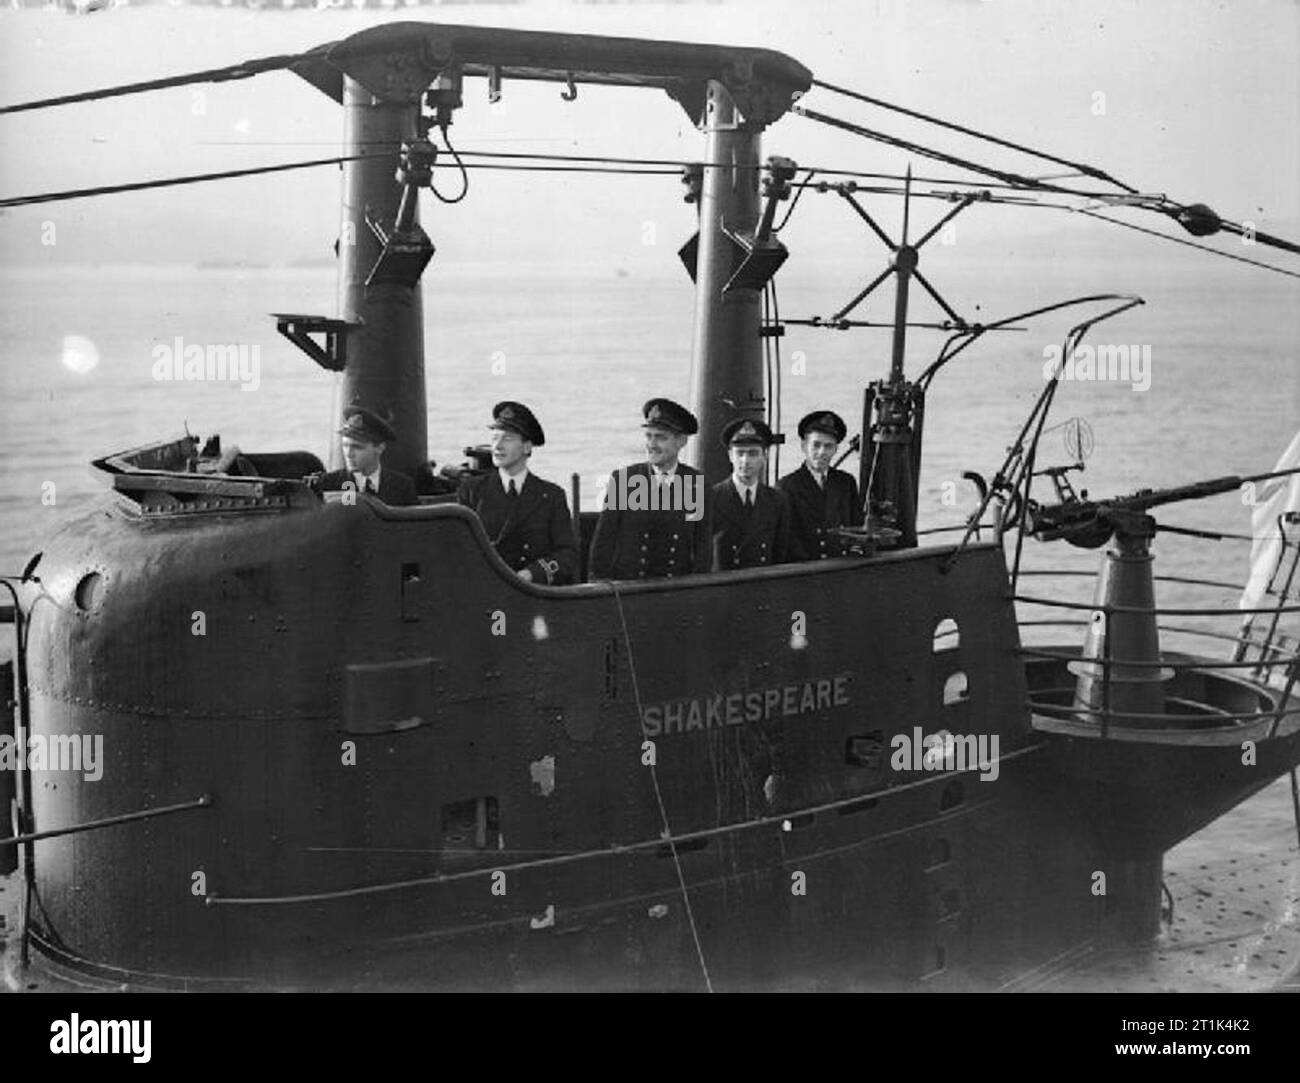 The Royal Navy Durng the Second World War HMS/M SHAKESPEARE returning to Devonport after 19 months operational activity in the Mediterranean. On the bridge of the SHAKESPEARE are, left to right: Lieutenant N D Campbell, RN, of Sevenoaks (Gunnery Officer); Lieutenant W E I Little-John, DSC, RANVR, of Melbourne, Australia (First Lieutenant); Lieutenant M F R Ainlie, DSO, DSC, RN, of Ash Vale, Surrey (Commanding Officer); Sub Lieutenant R G Pearson, RNVR, of Hitchin, Herts (Torpedo Officer); Lieutenant L H Richardson, RN, of Jersey, Channel Islands (Navigating Officer). Naval Radar: The conning t Stock Photo